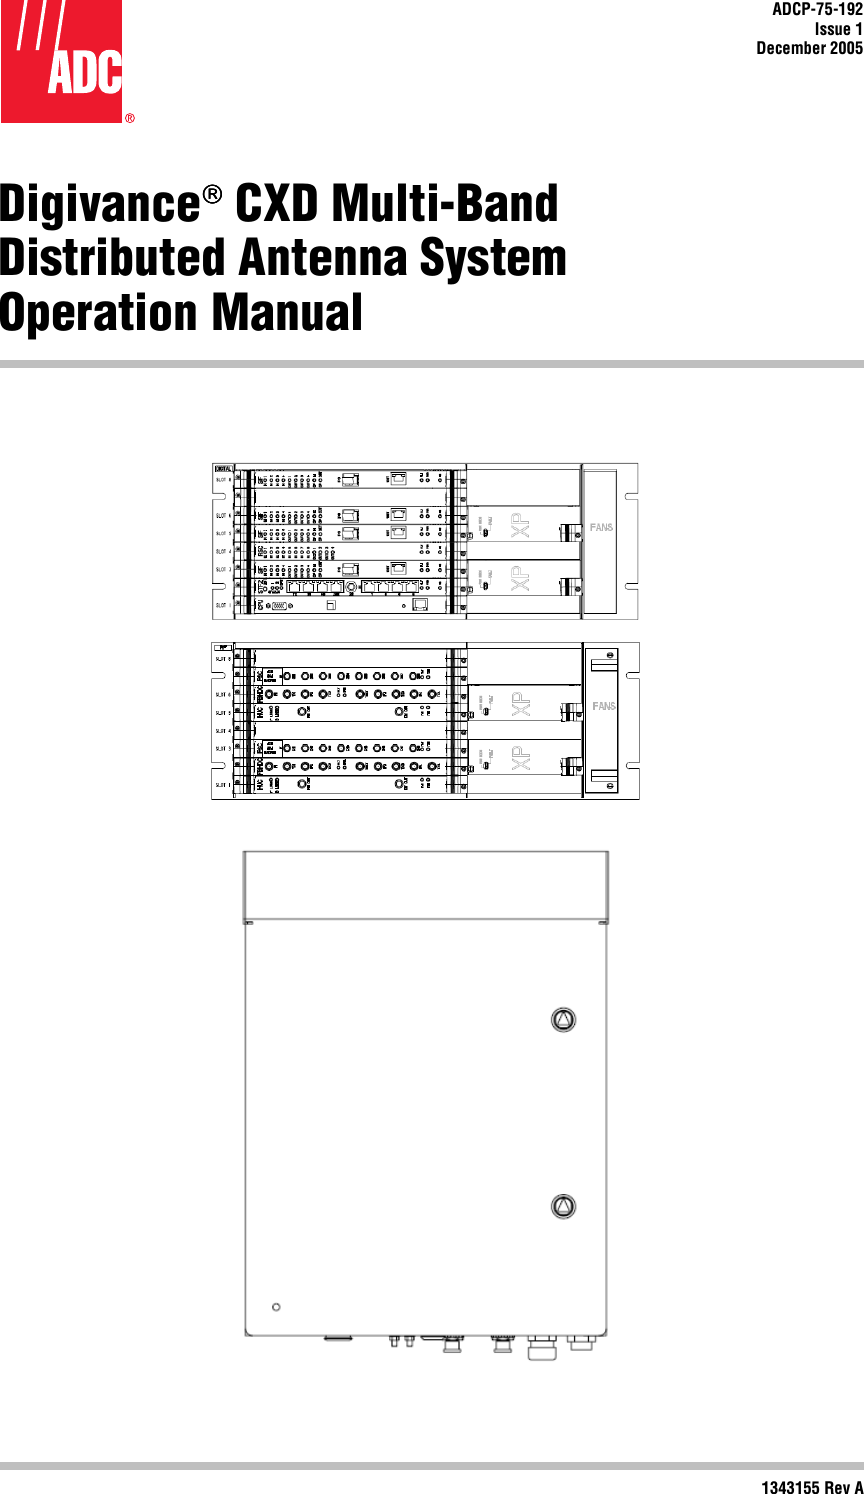     ADCP-75-192 Issue 1 December 2005    Digivance CXD Multi-Band Distributed Antenna System Operation Manual         1343155 Rev A  